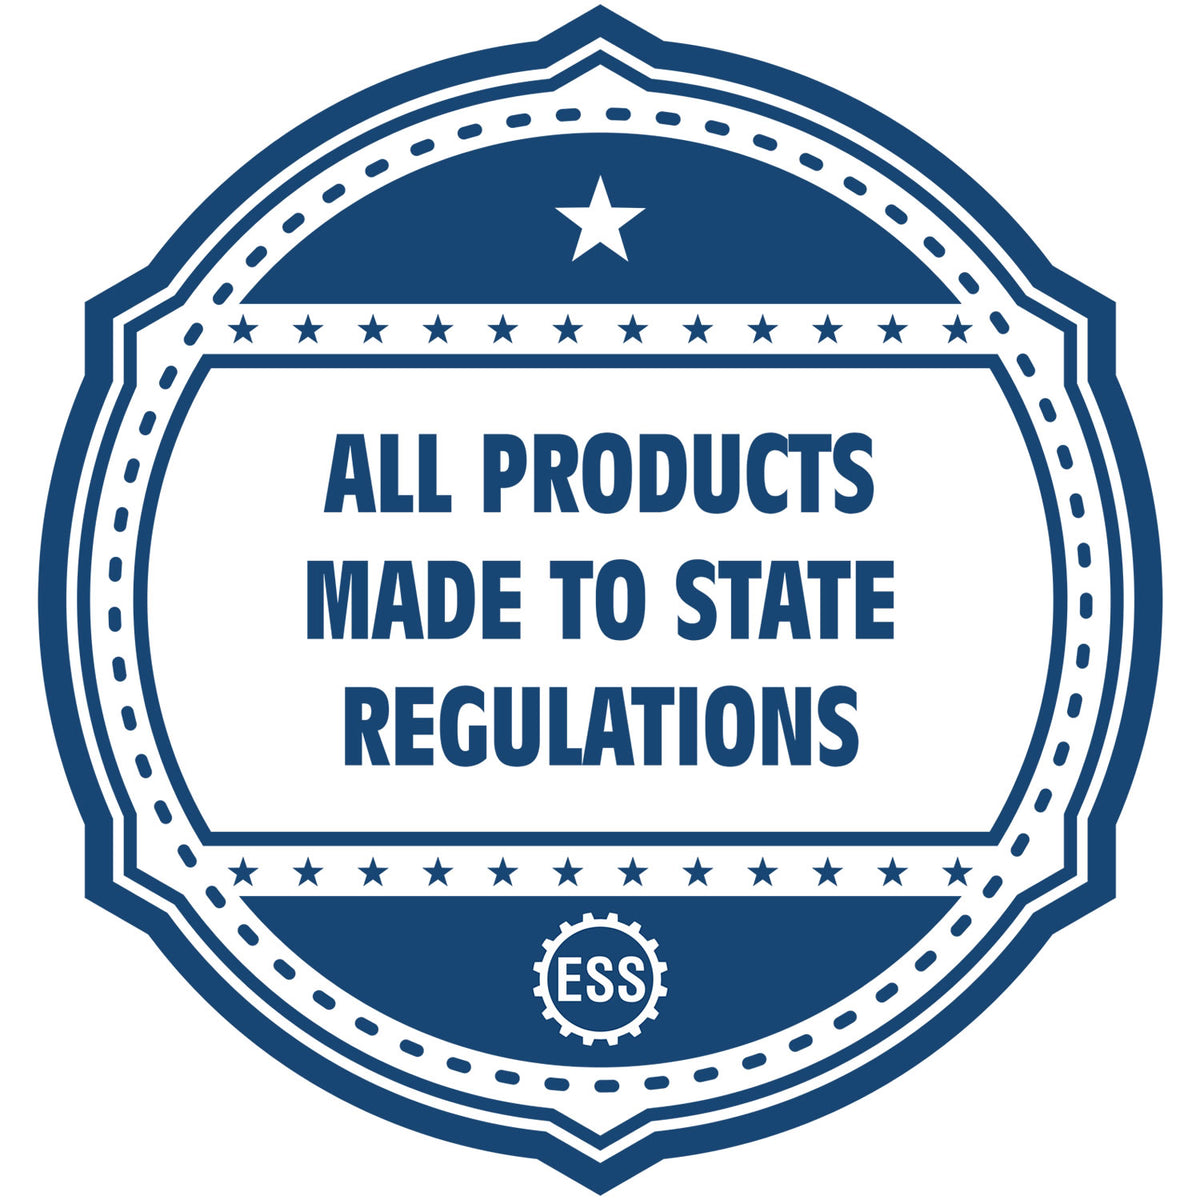 An icon or badge element for the Self-Inking State Seal Connecticut Notary Stamp showing that this product is made in compliance with state regulations.